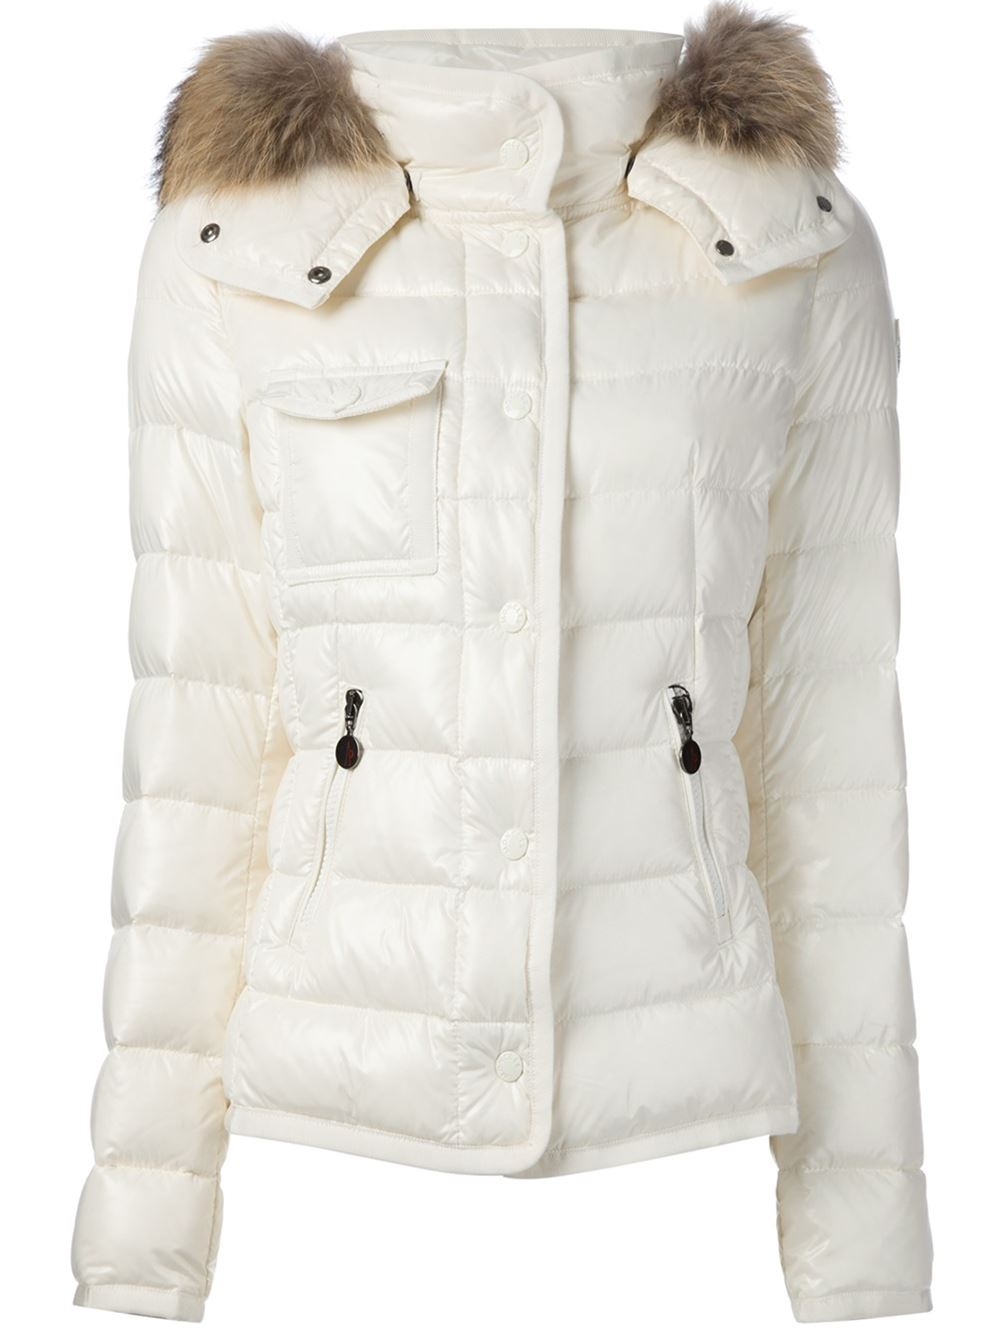 Lyst - Moncler Armoise Jacket in White